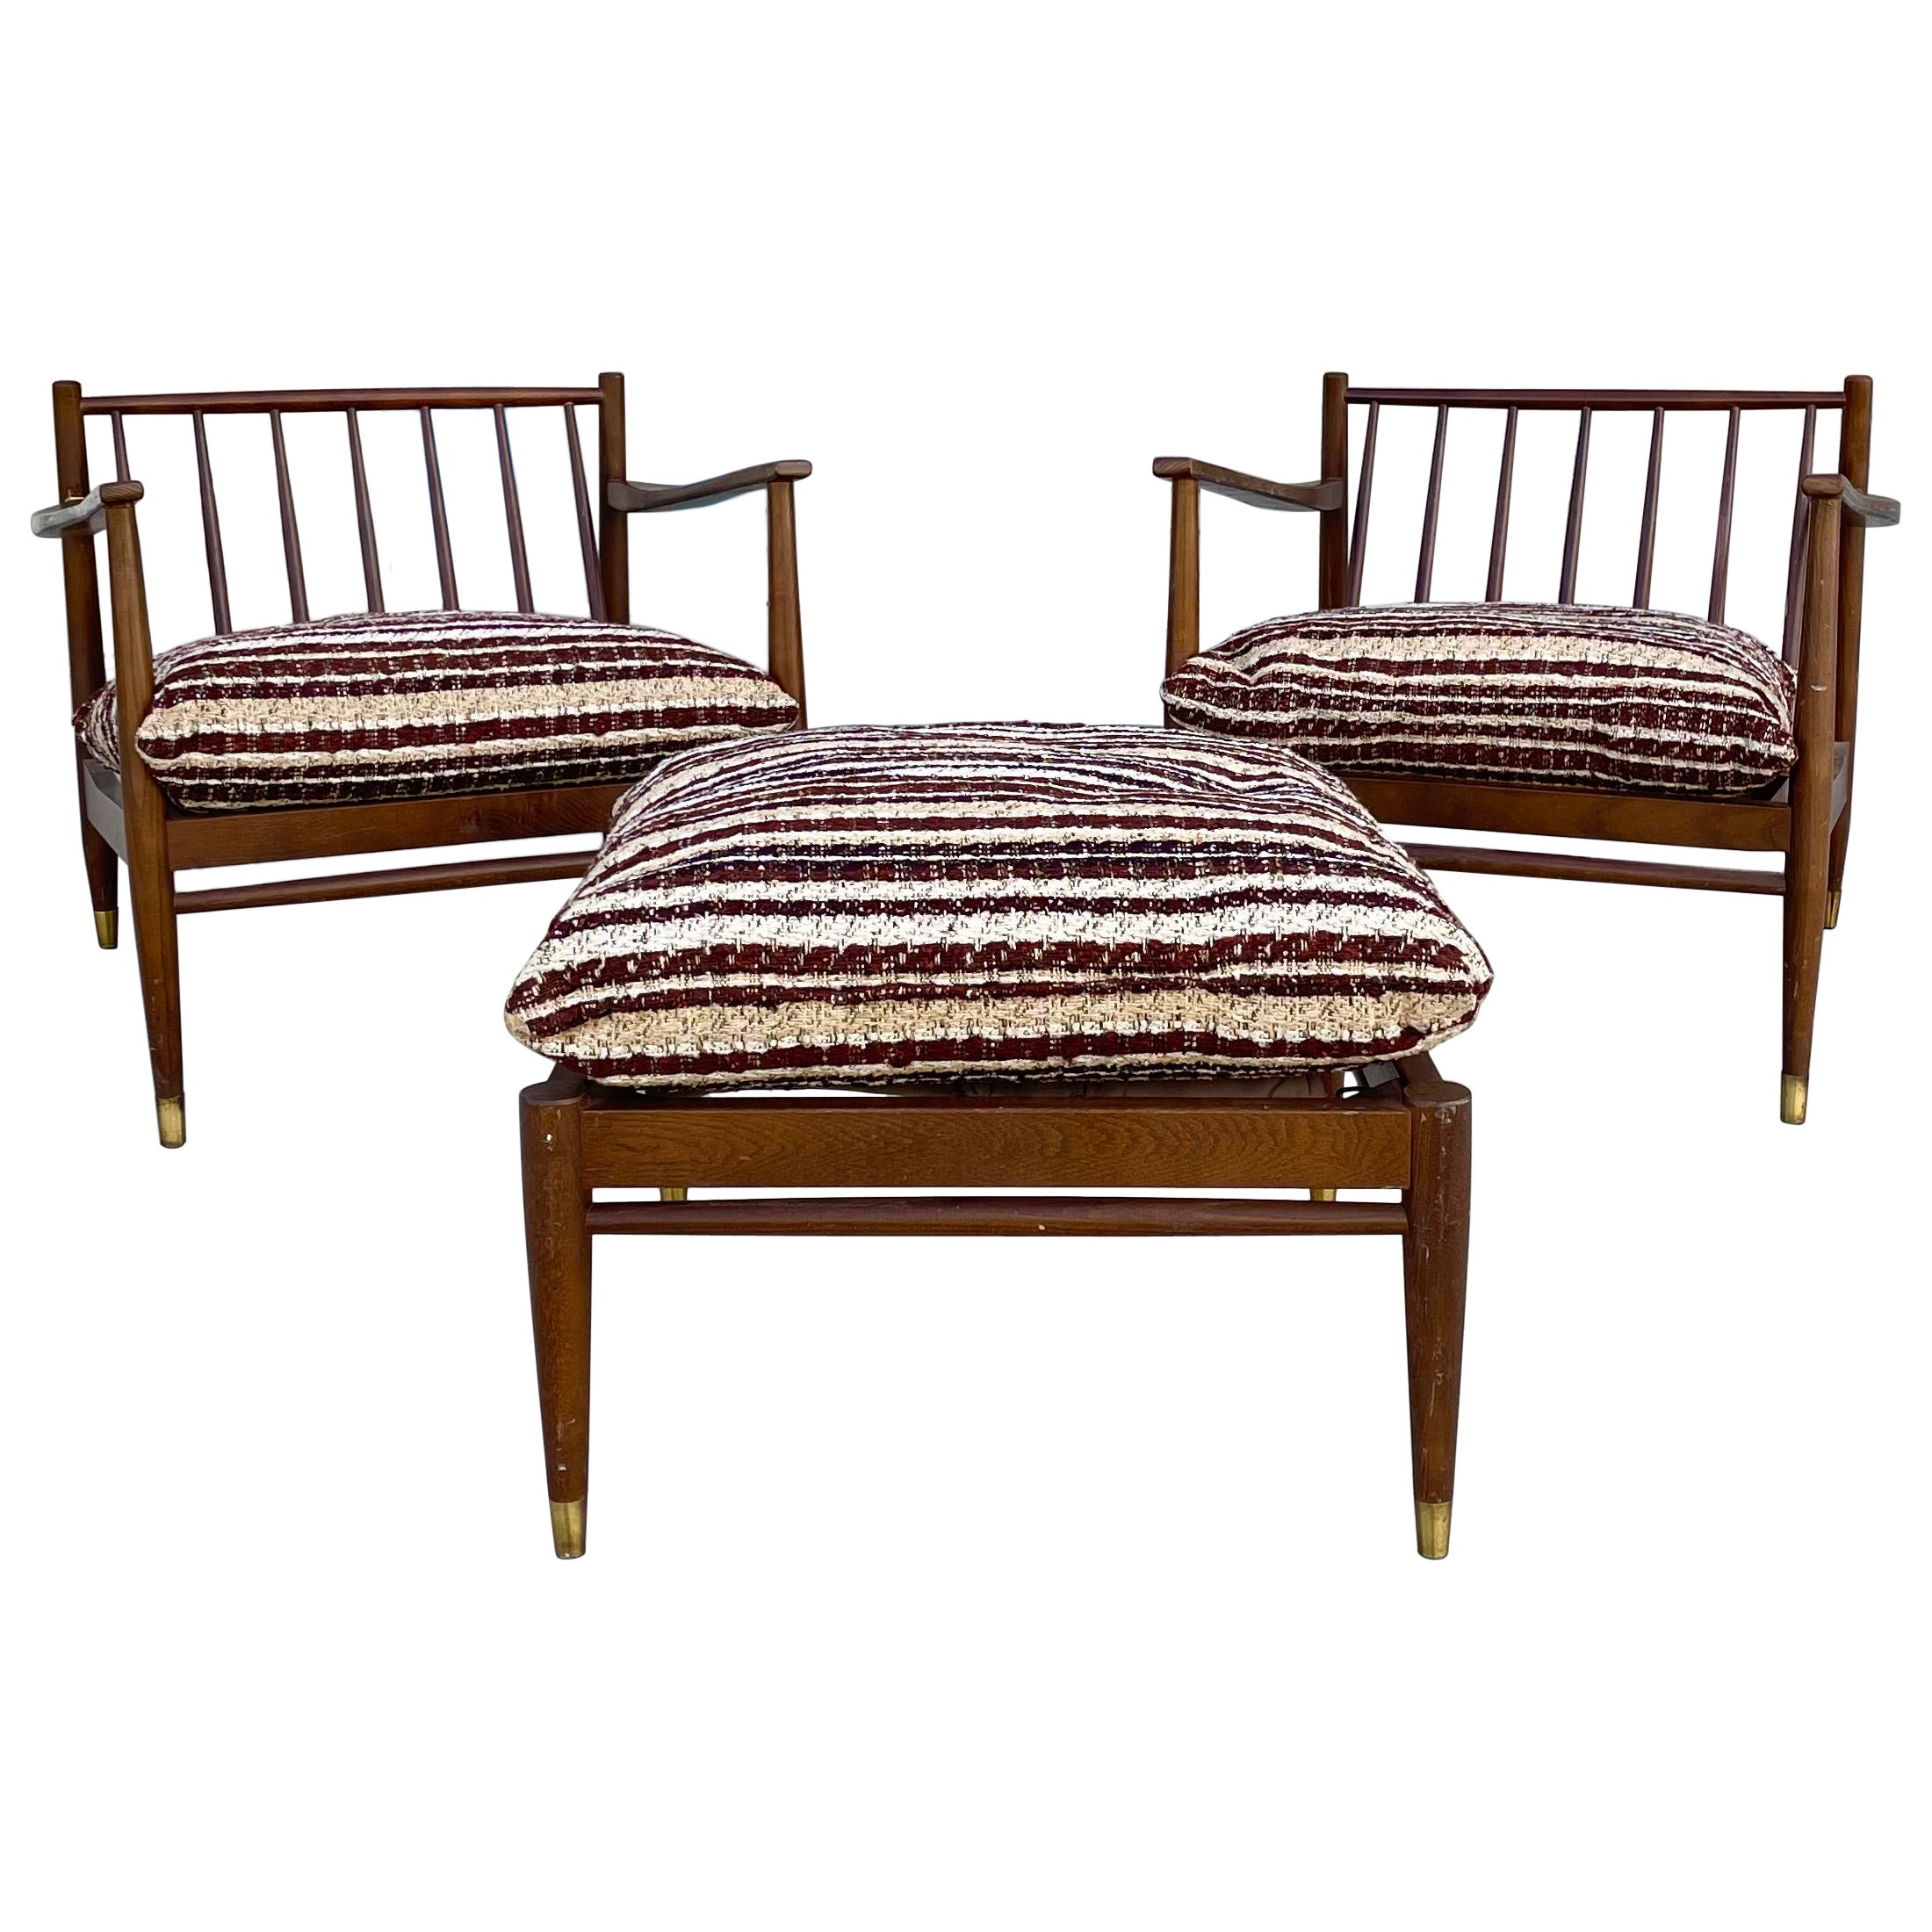 1960s Mid Century Walnut Slipper Lounge Chairs - Set of 3 For Sale